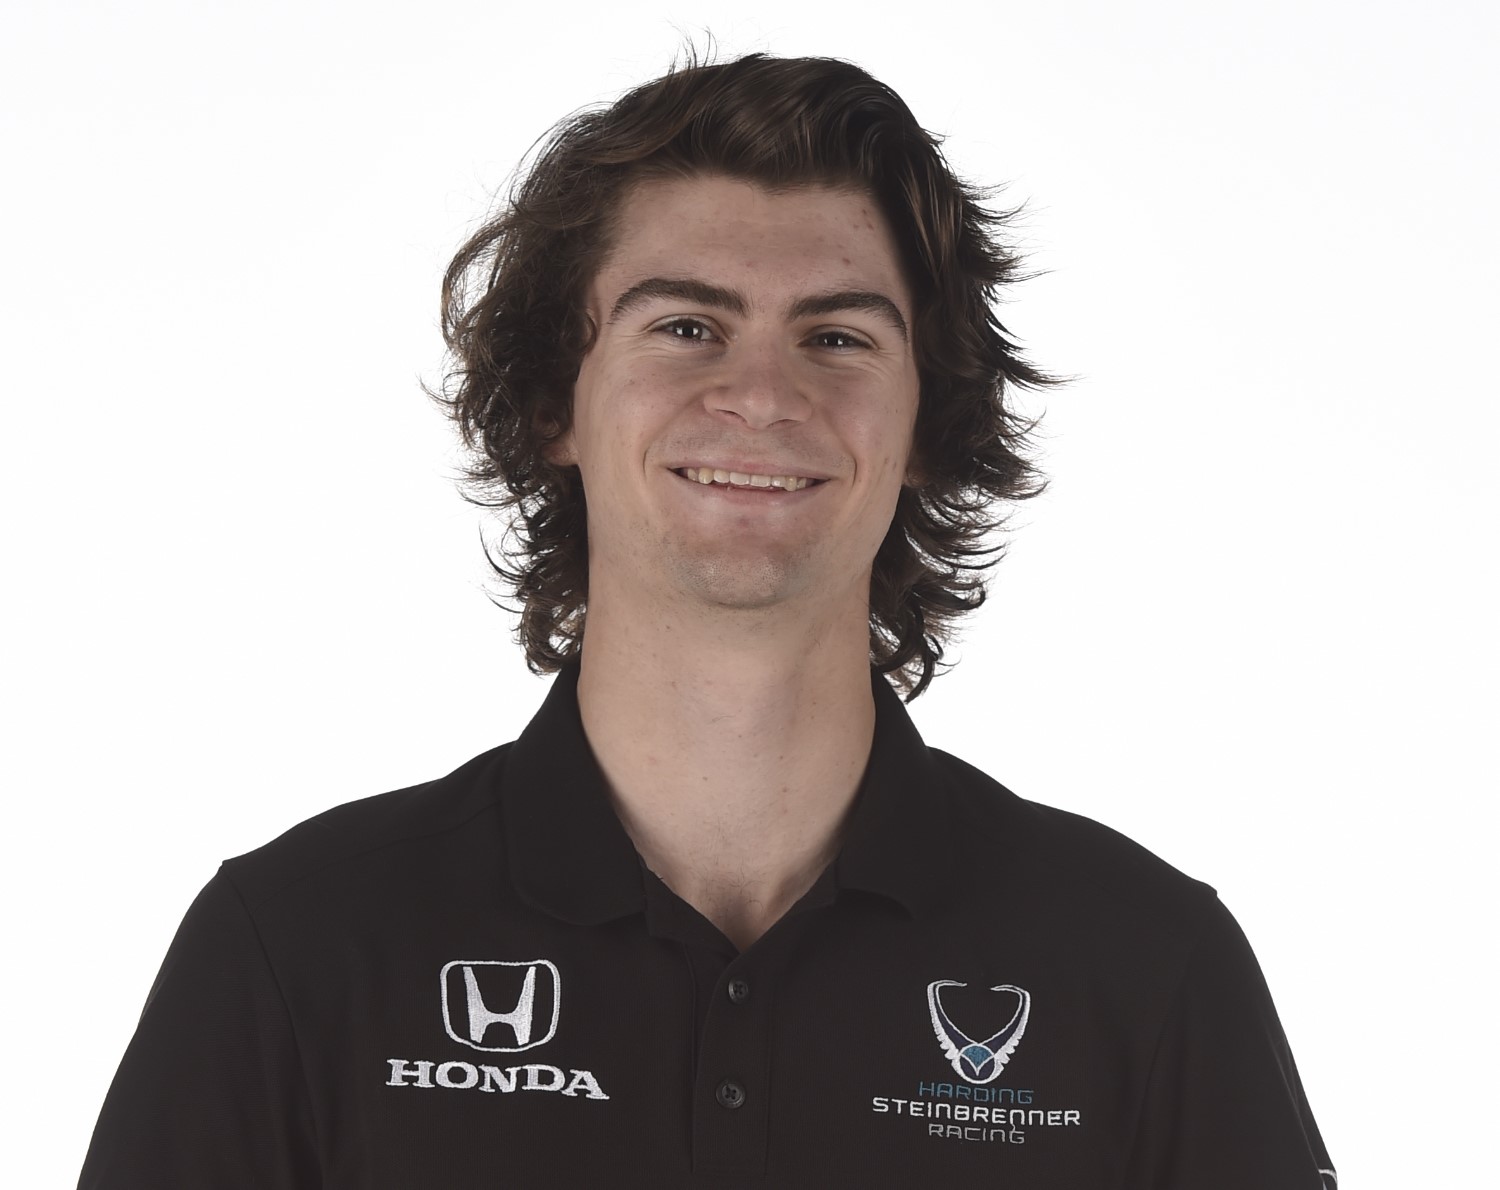 Why is this man smiling? He just landed a top IndyCar ride